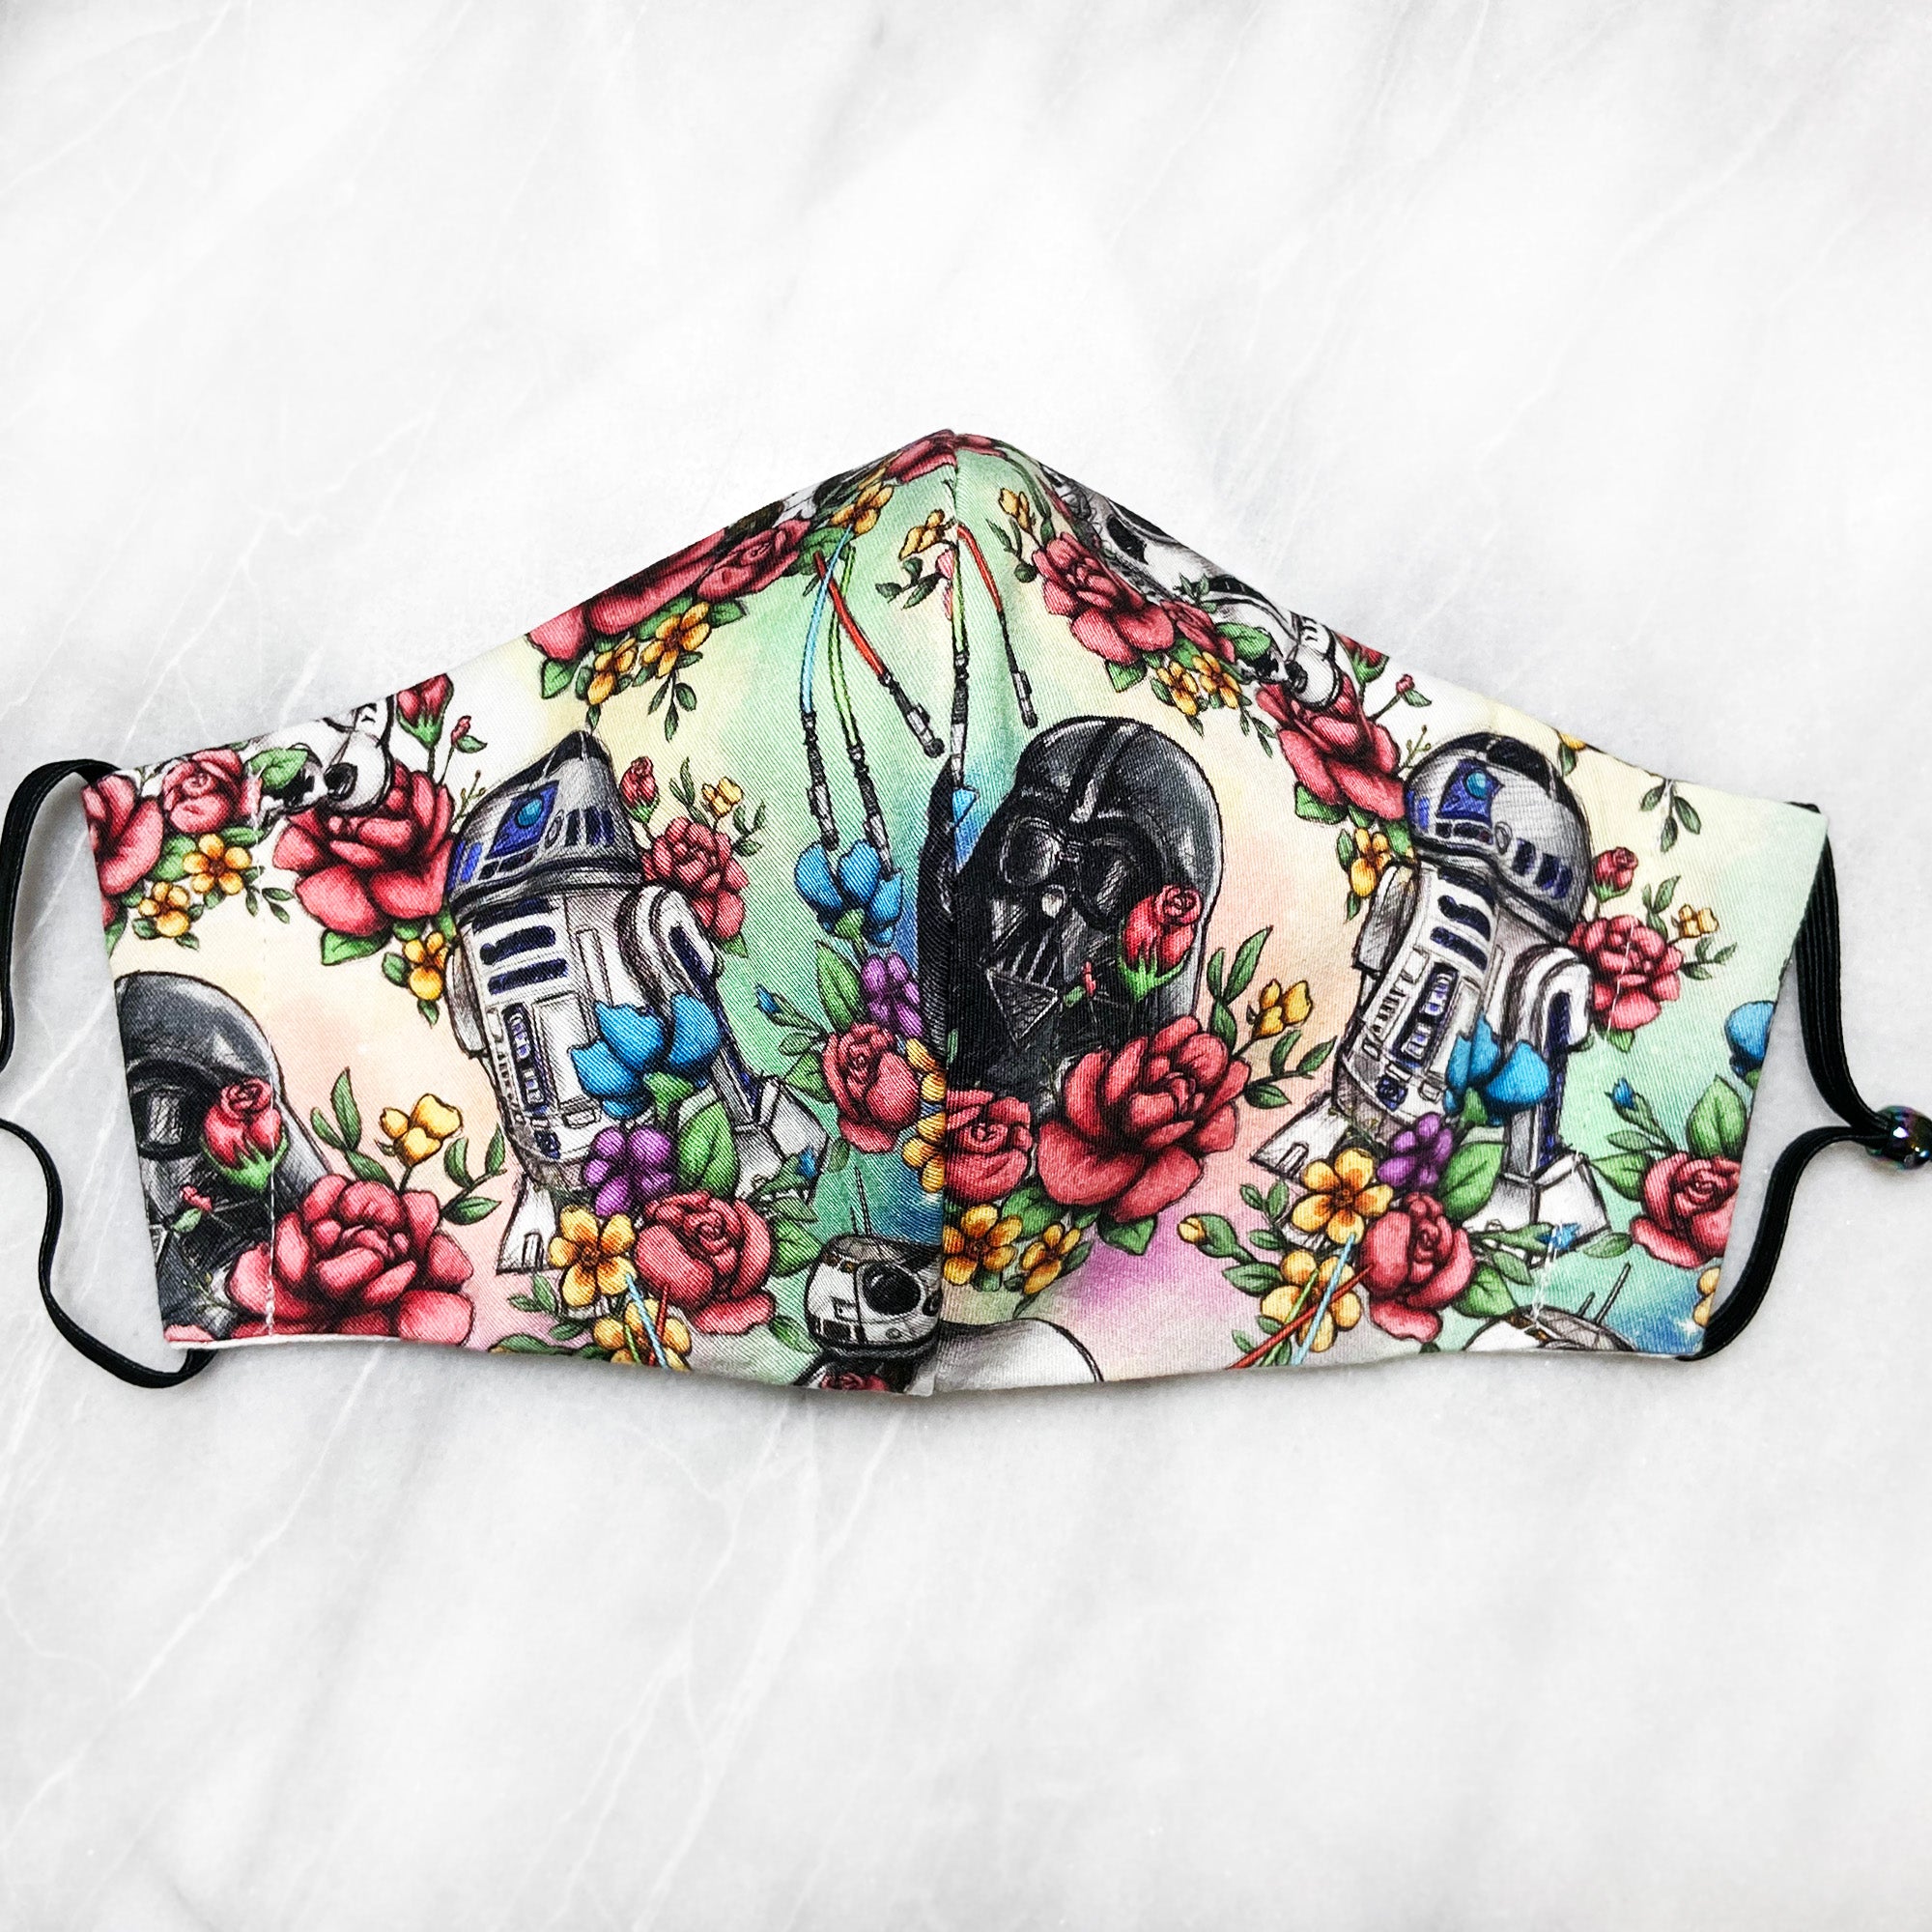 SPECIAL EDITION "The Force" Floral Deluxe Olson Face Mask